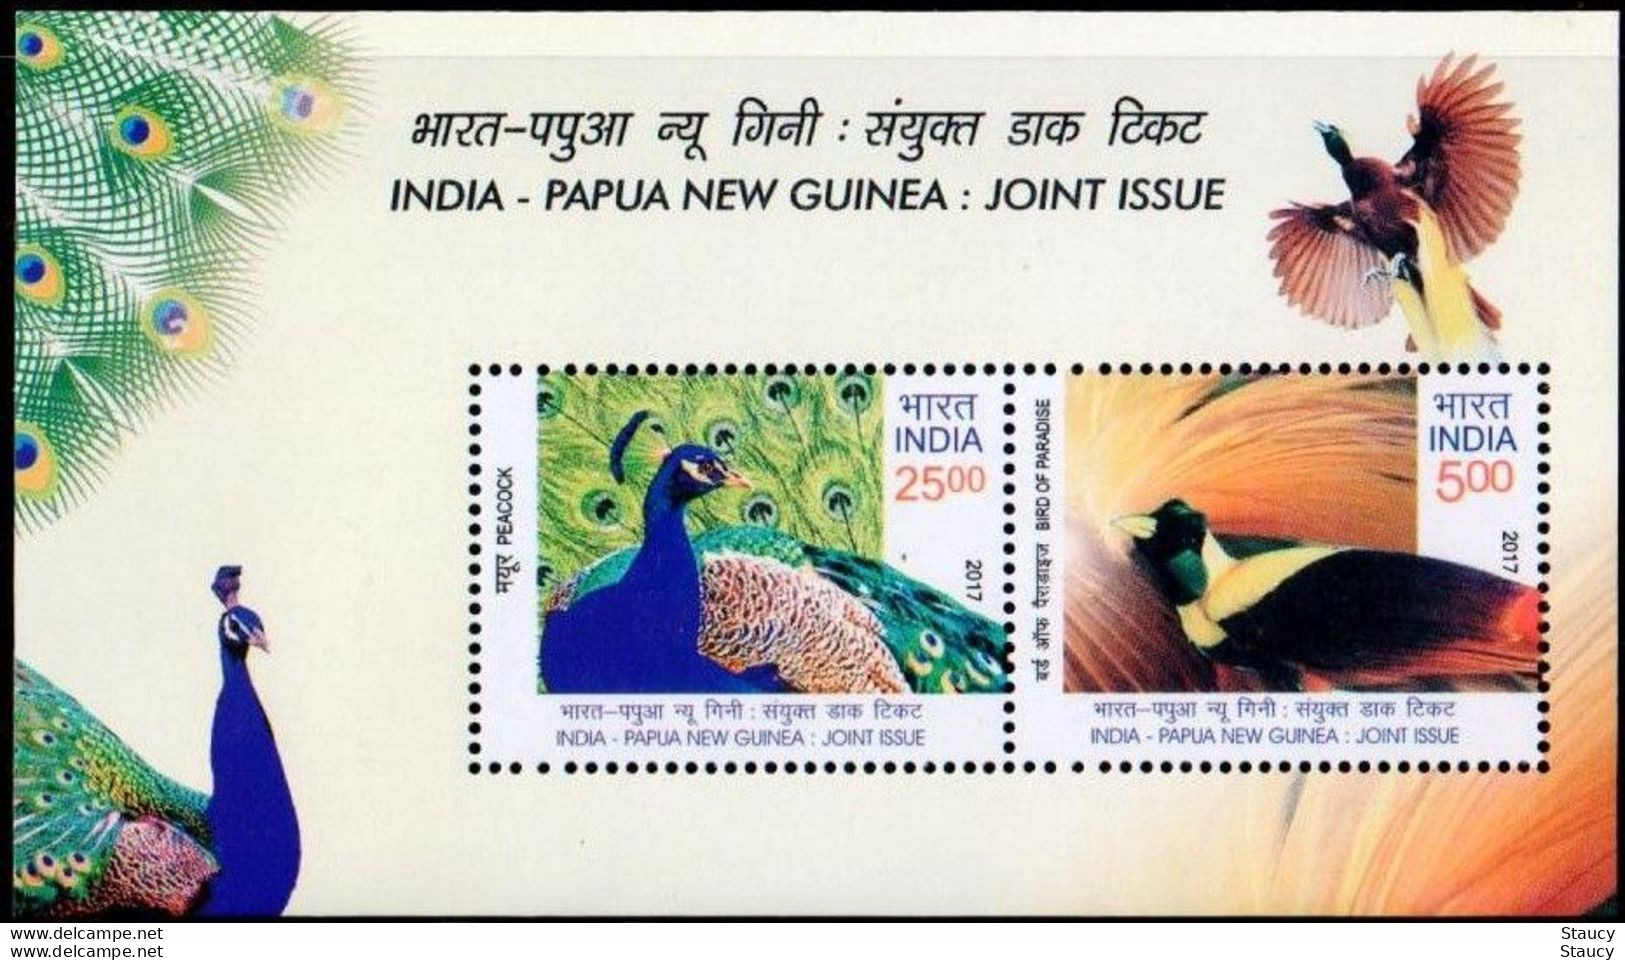 INDIA 2017 INDIA PAPUA NEW GUINEA JOINT ISSUE BIRDS 2v Miniature Sheet MS MNH As Per Scan - Climbing Birds